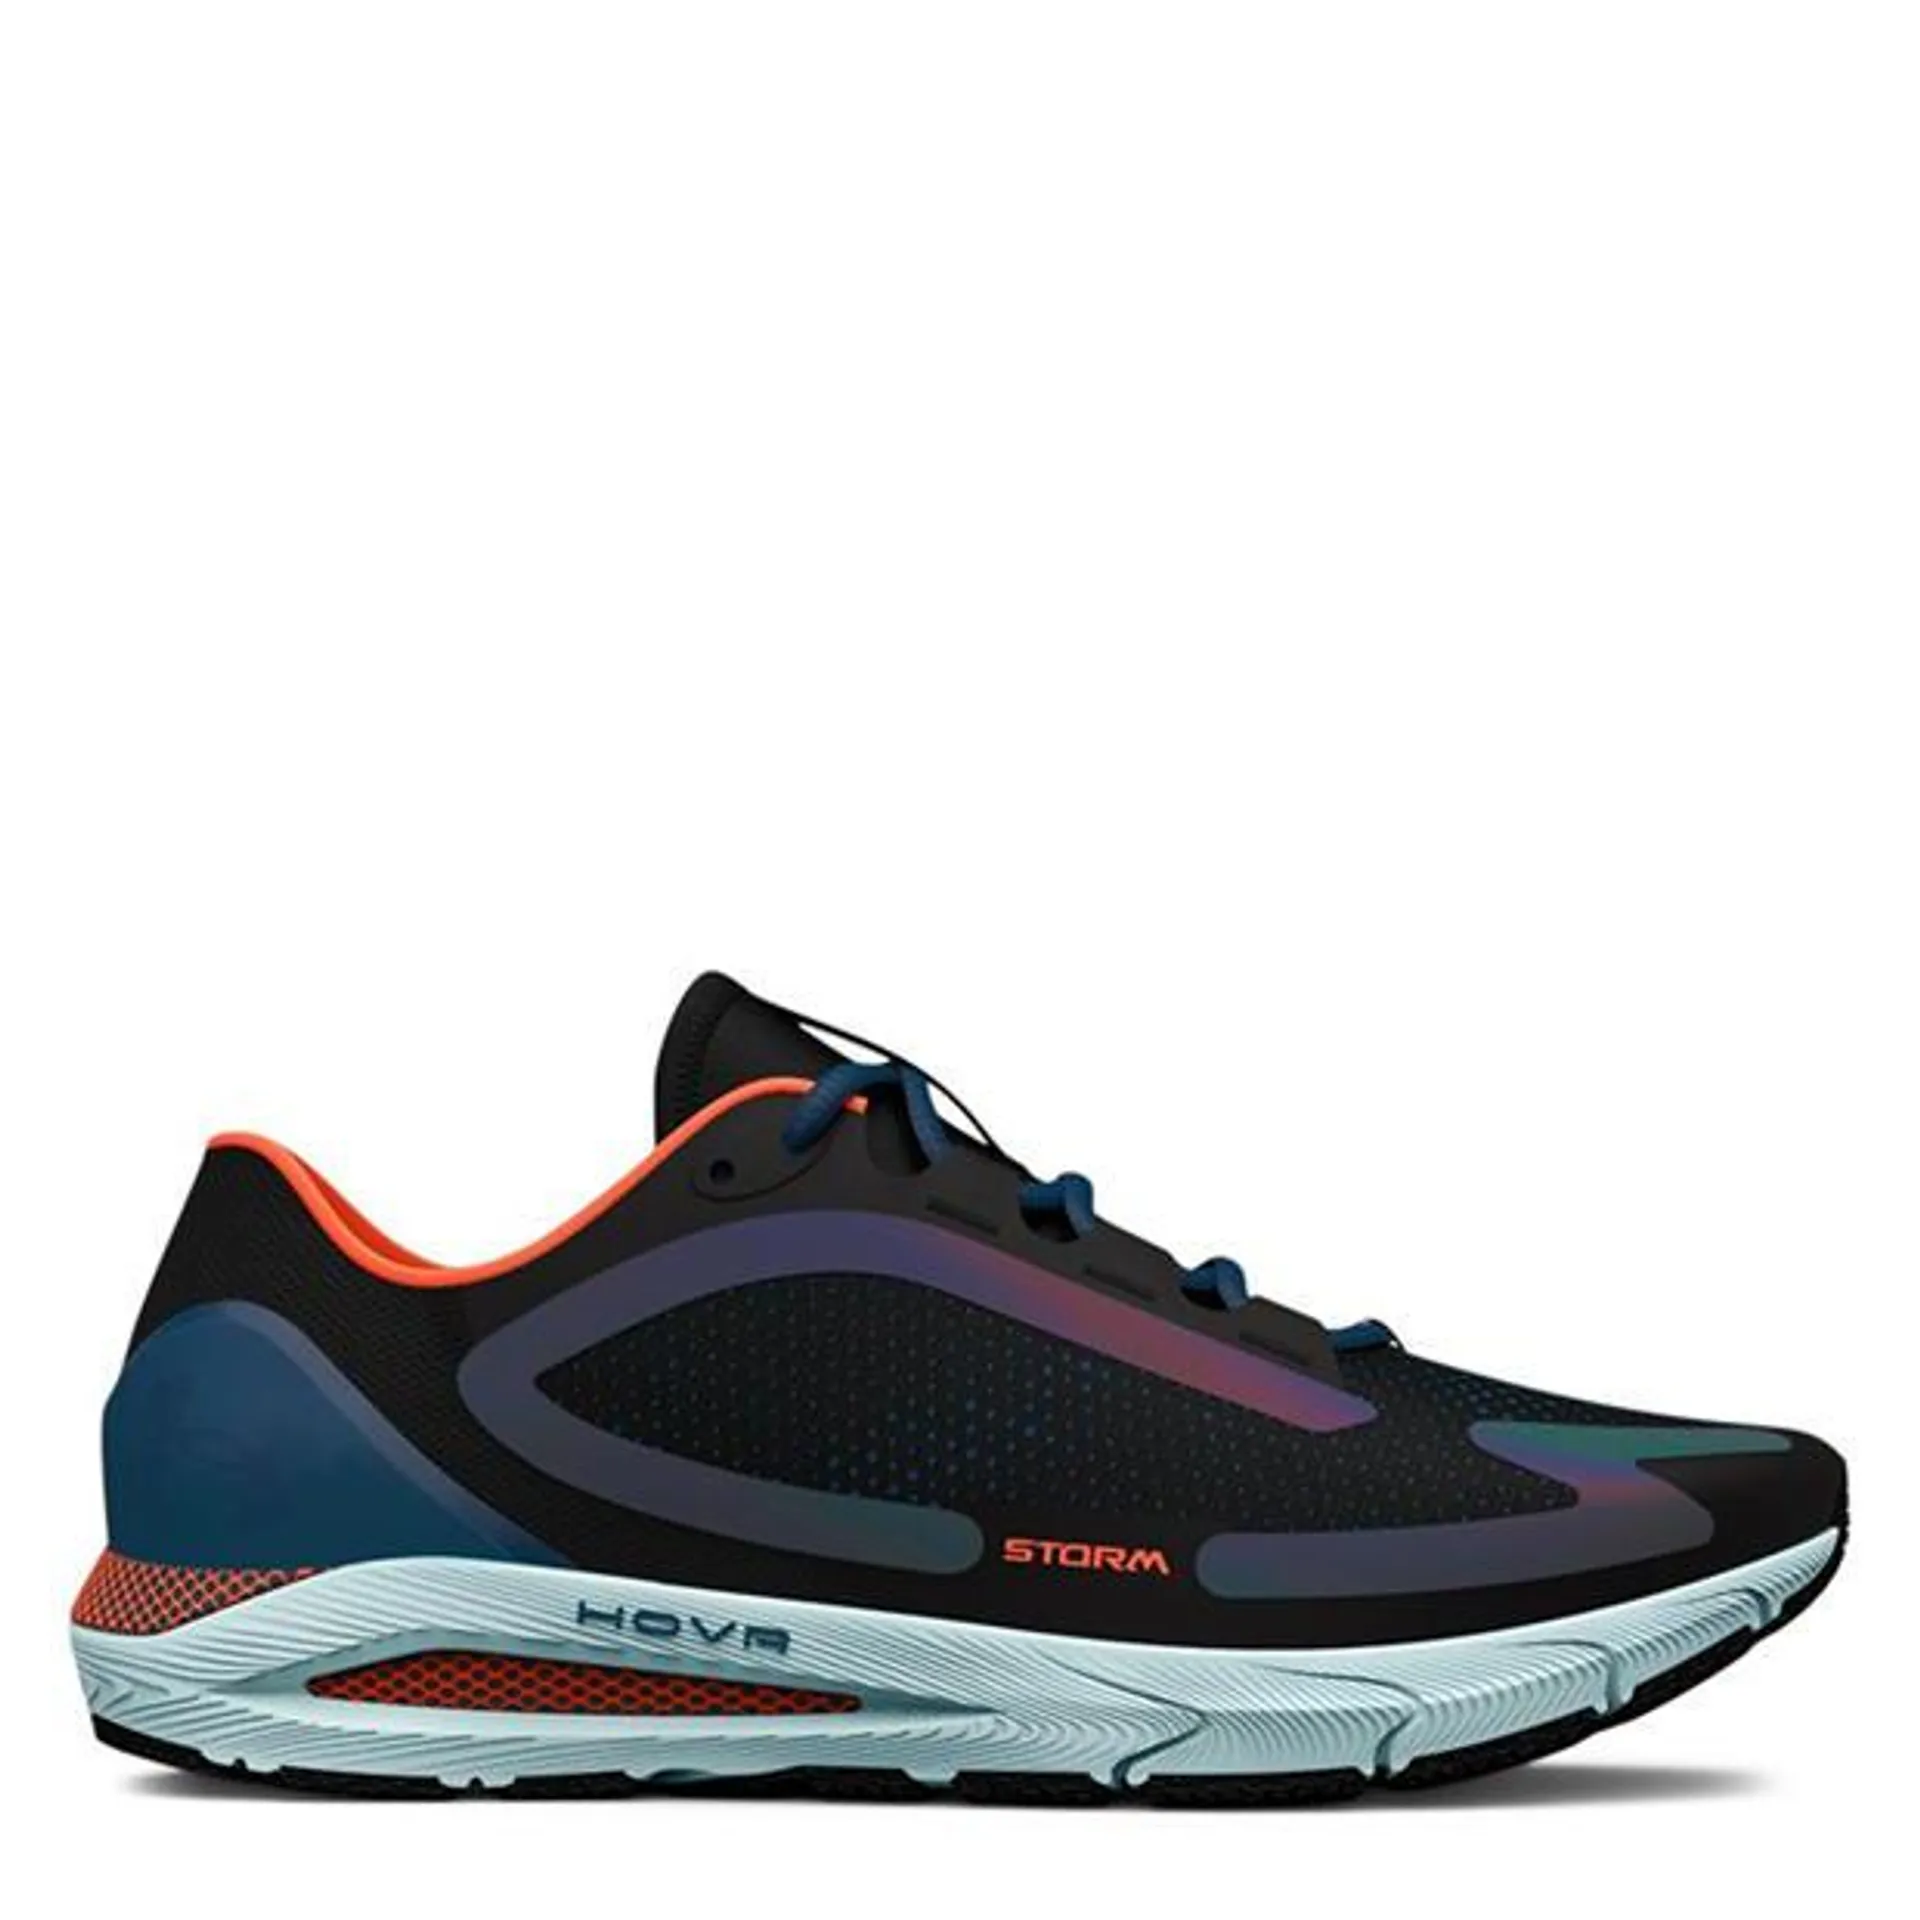 HOVR Sonic 5 Storm Women's Running Shoes